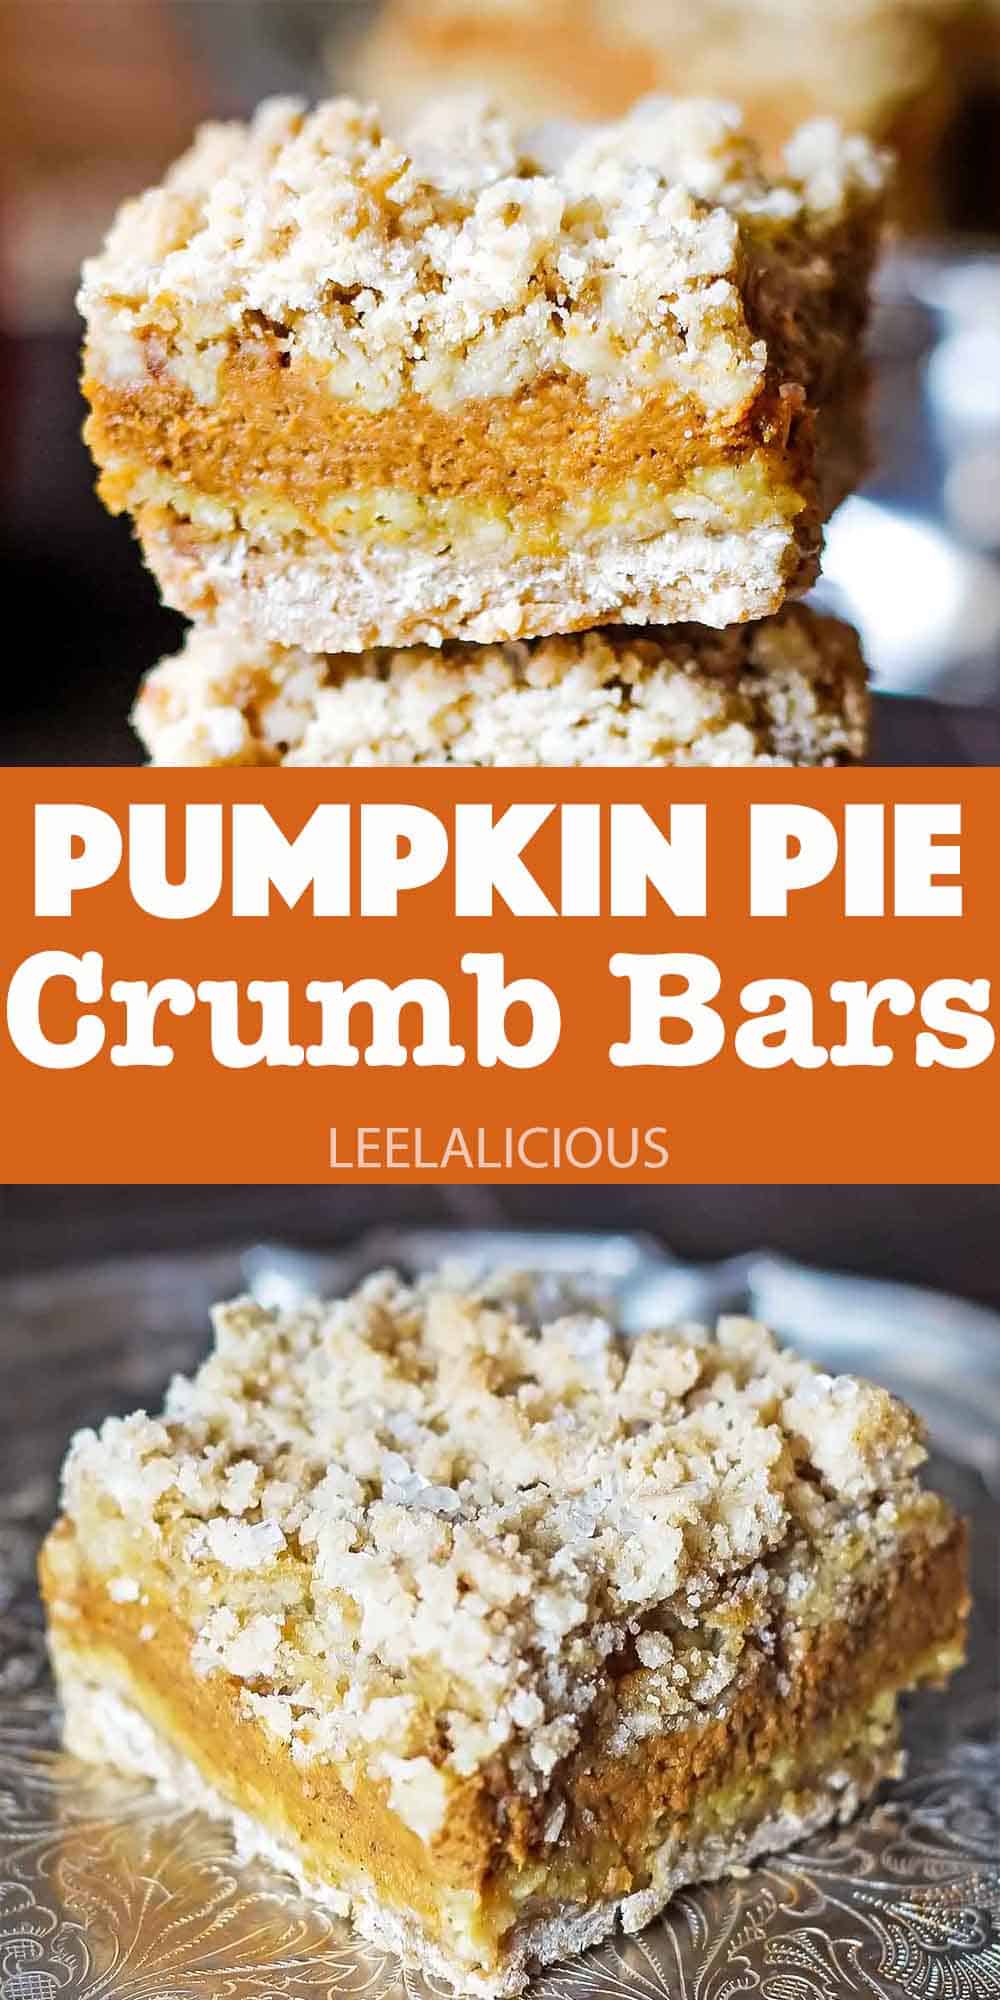 Pumpkin pie bars with cookie crust, pumpkin filling layer and crumble topping